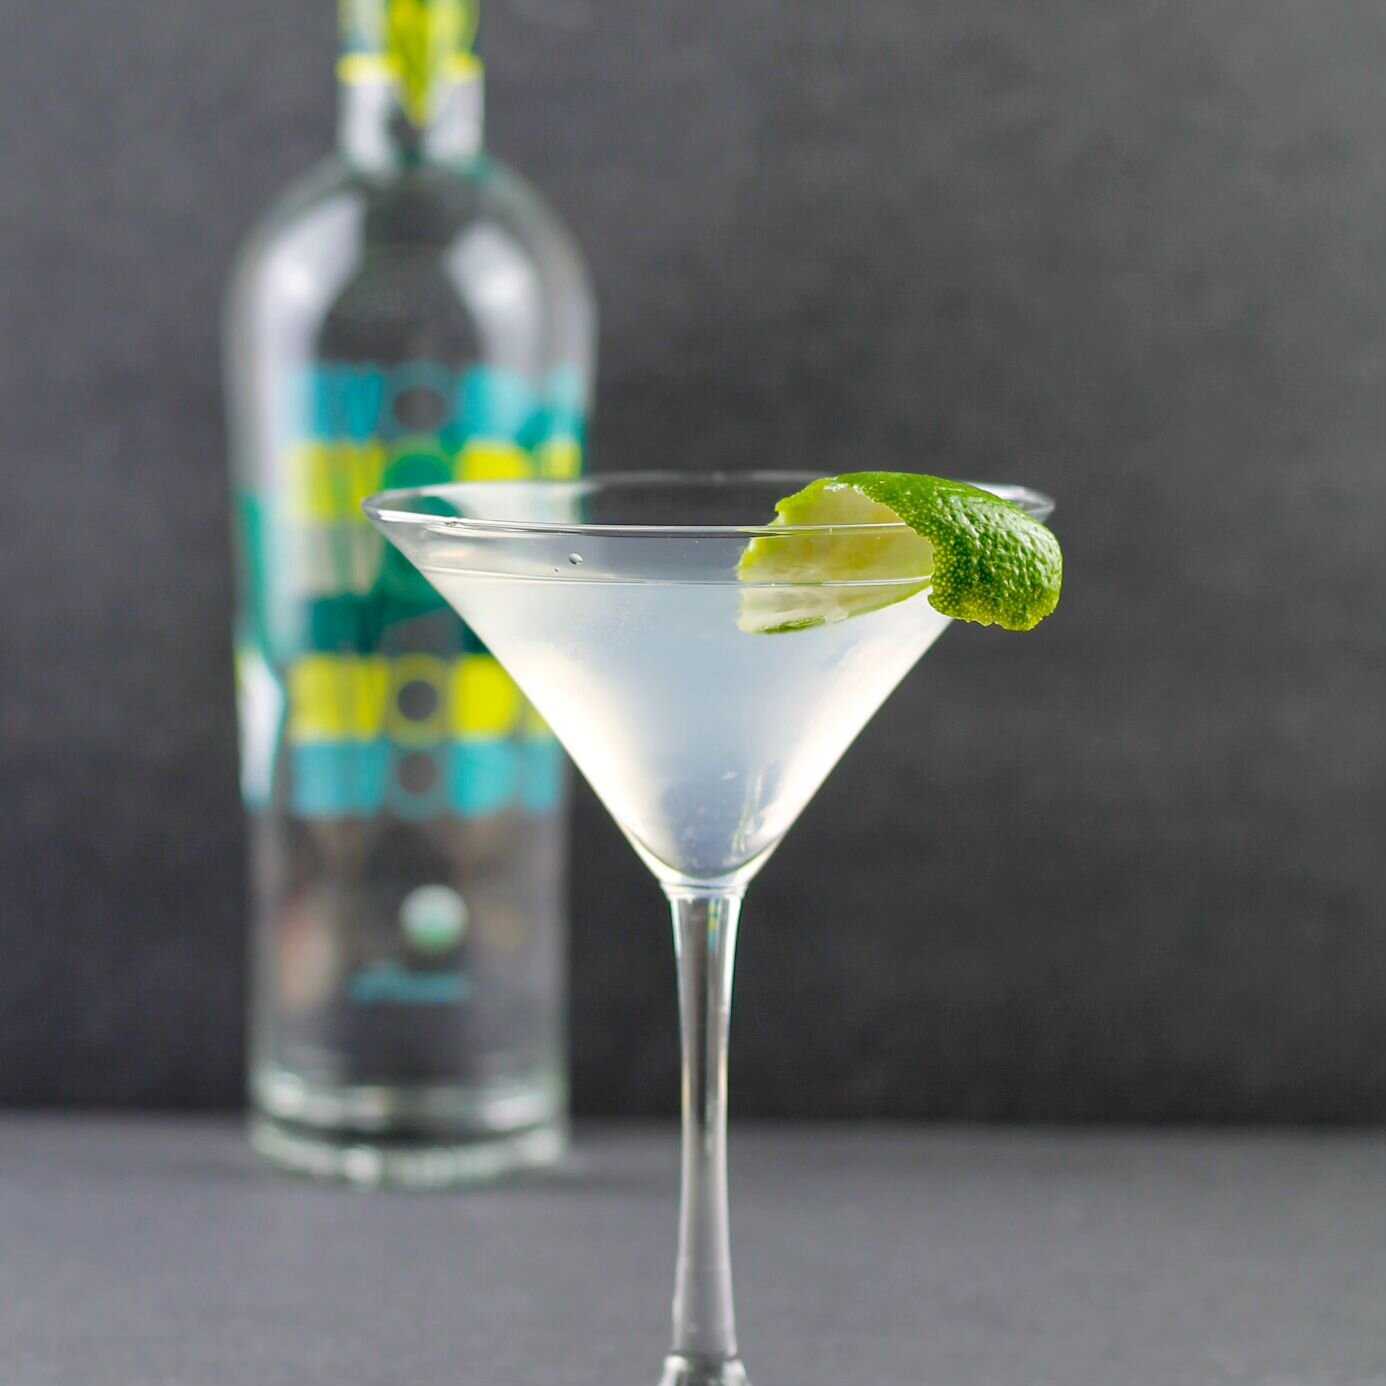 The weather this weekend will pair perfectly with a refreshing Vodka Gimlet. Here is an easy recipe you can make at home!

Hotcha Vodka Gimlet:

2 oz Hotcha Vodka
1 oz Fresh-squeezed lime juice
1/2 oz simple syrup

Add all ingredients to a shaker wit